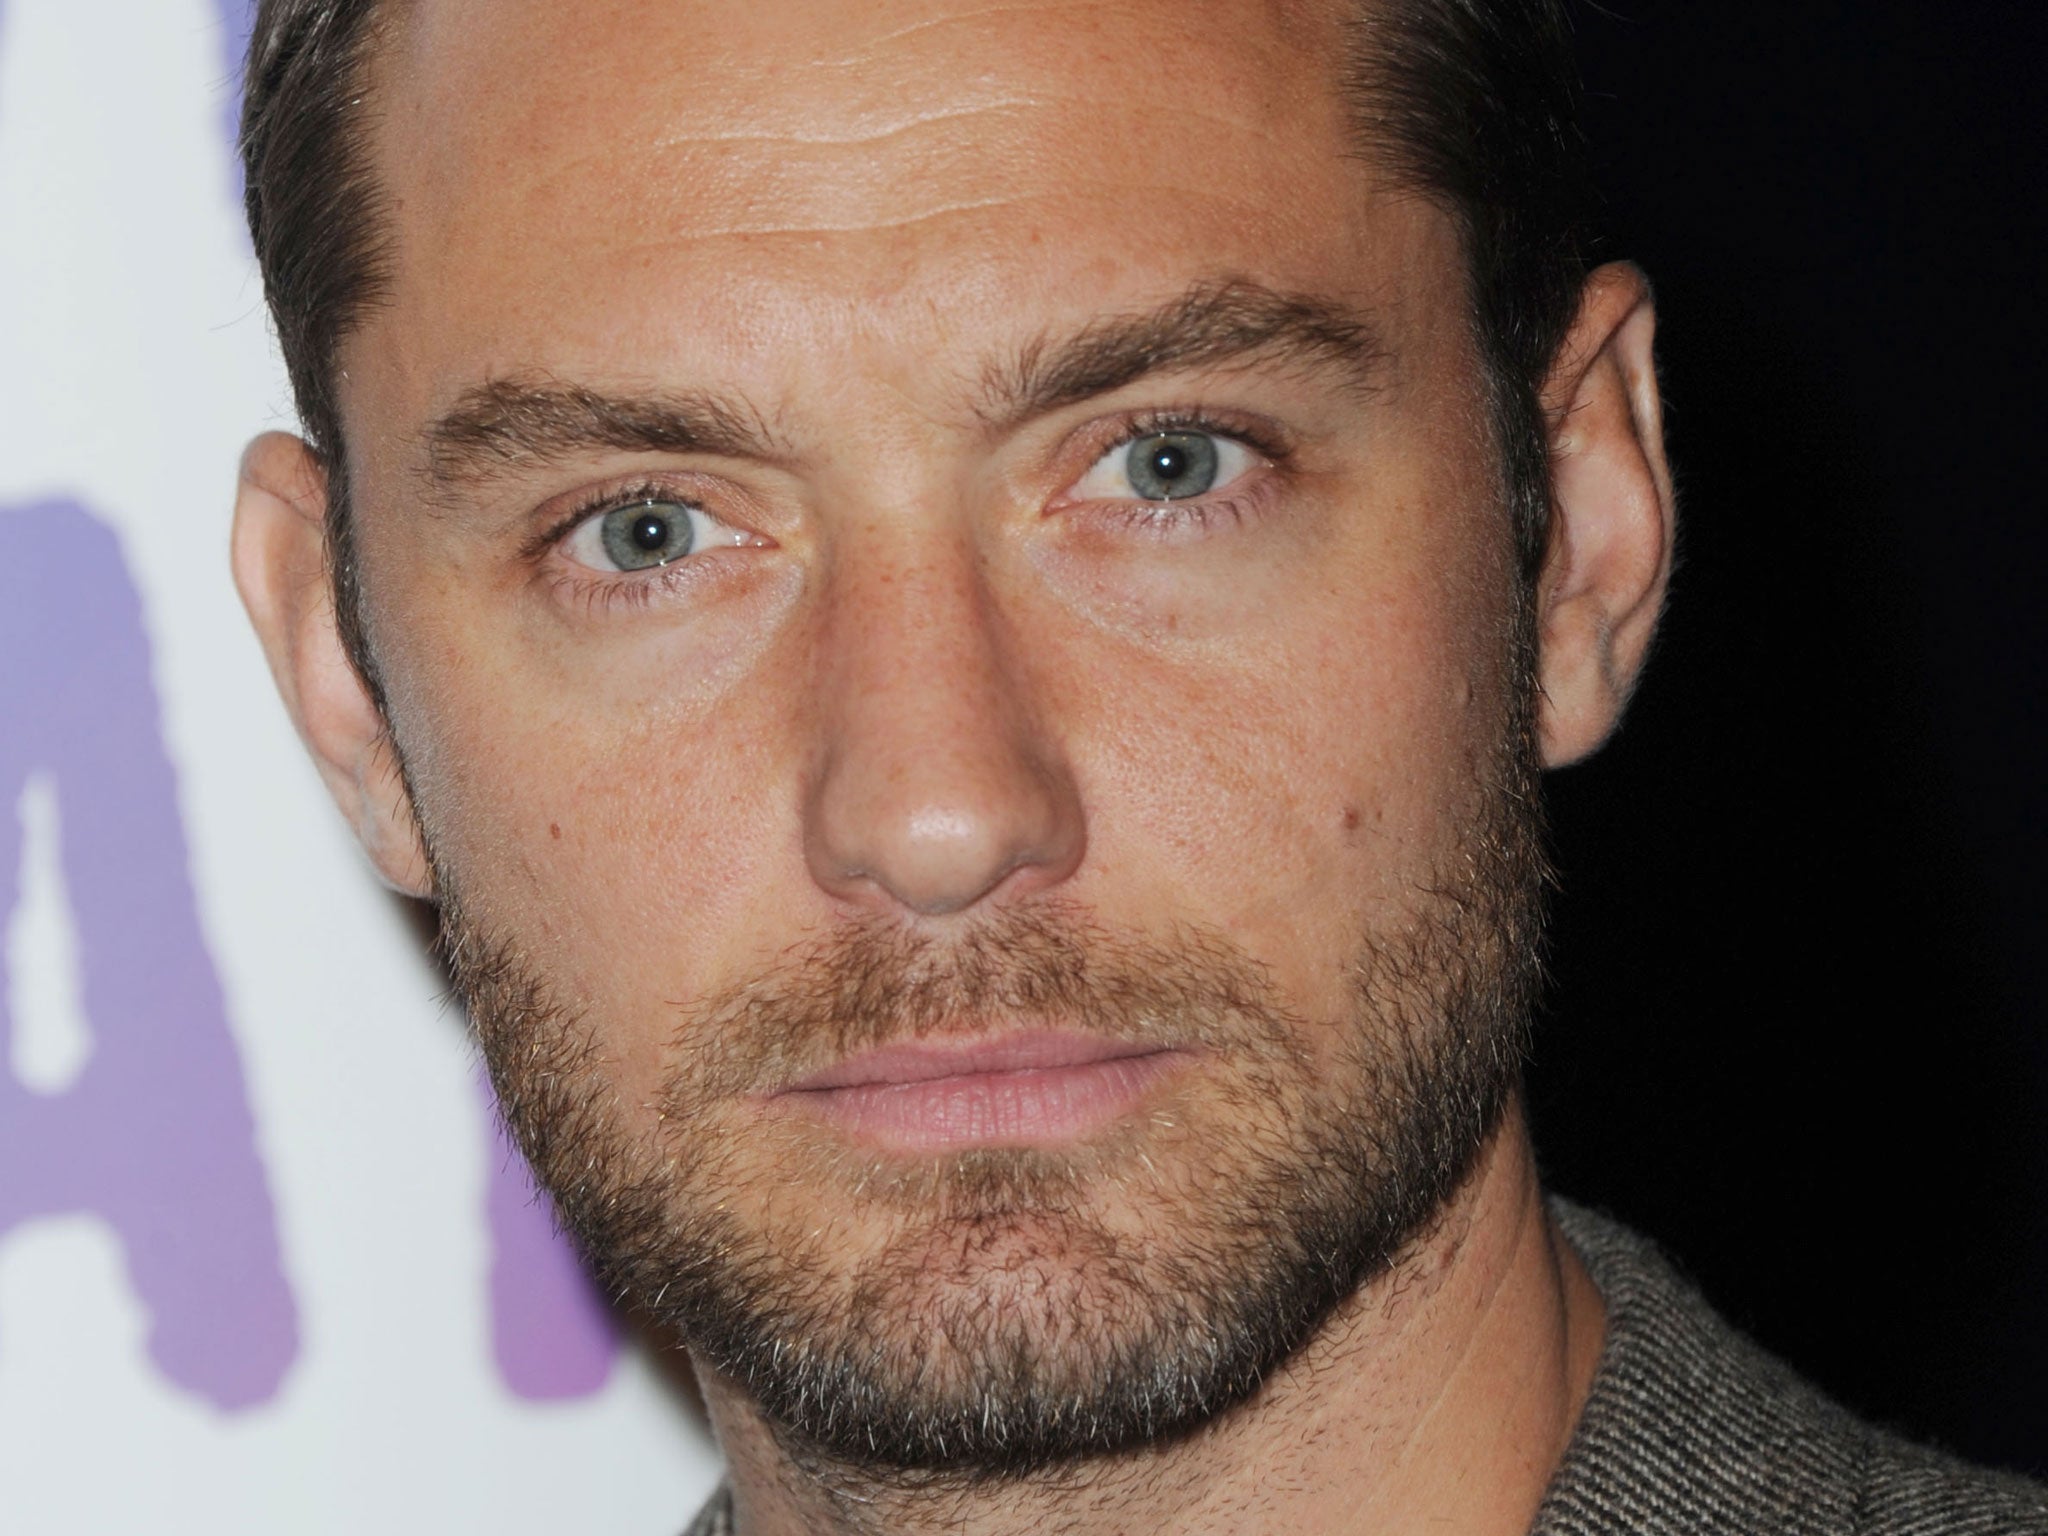 Jude Law has just announced that he will be fathering his fifth child